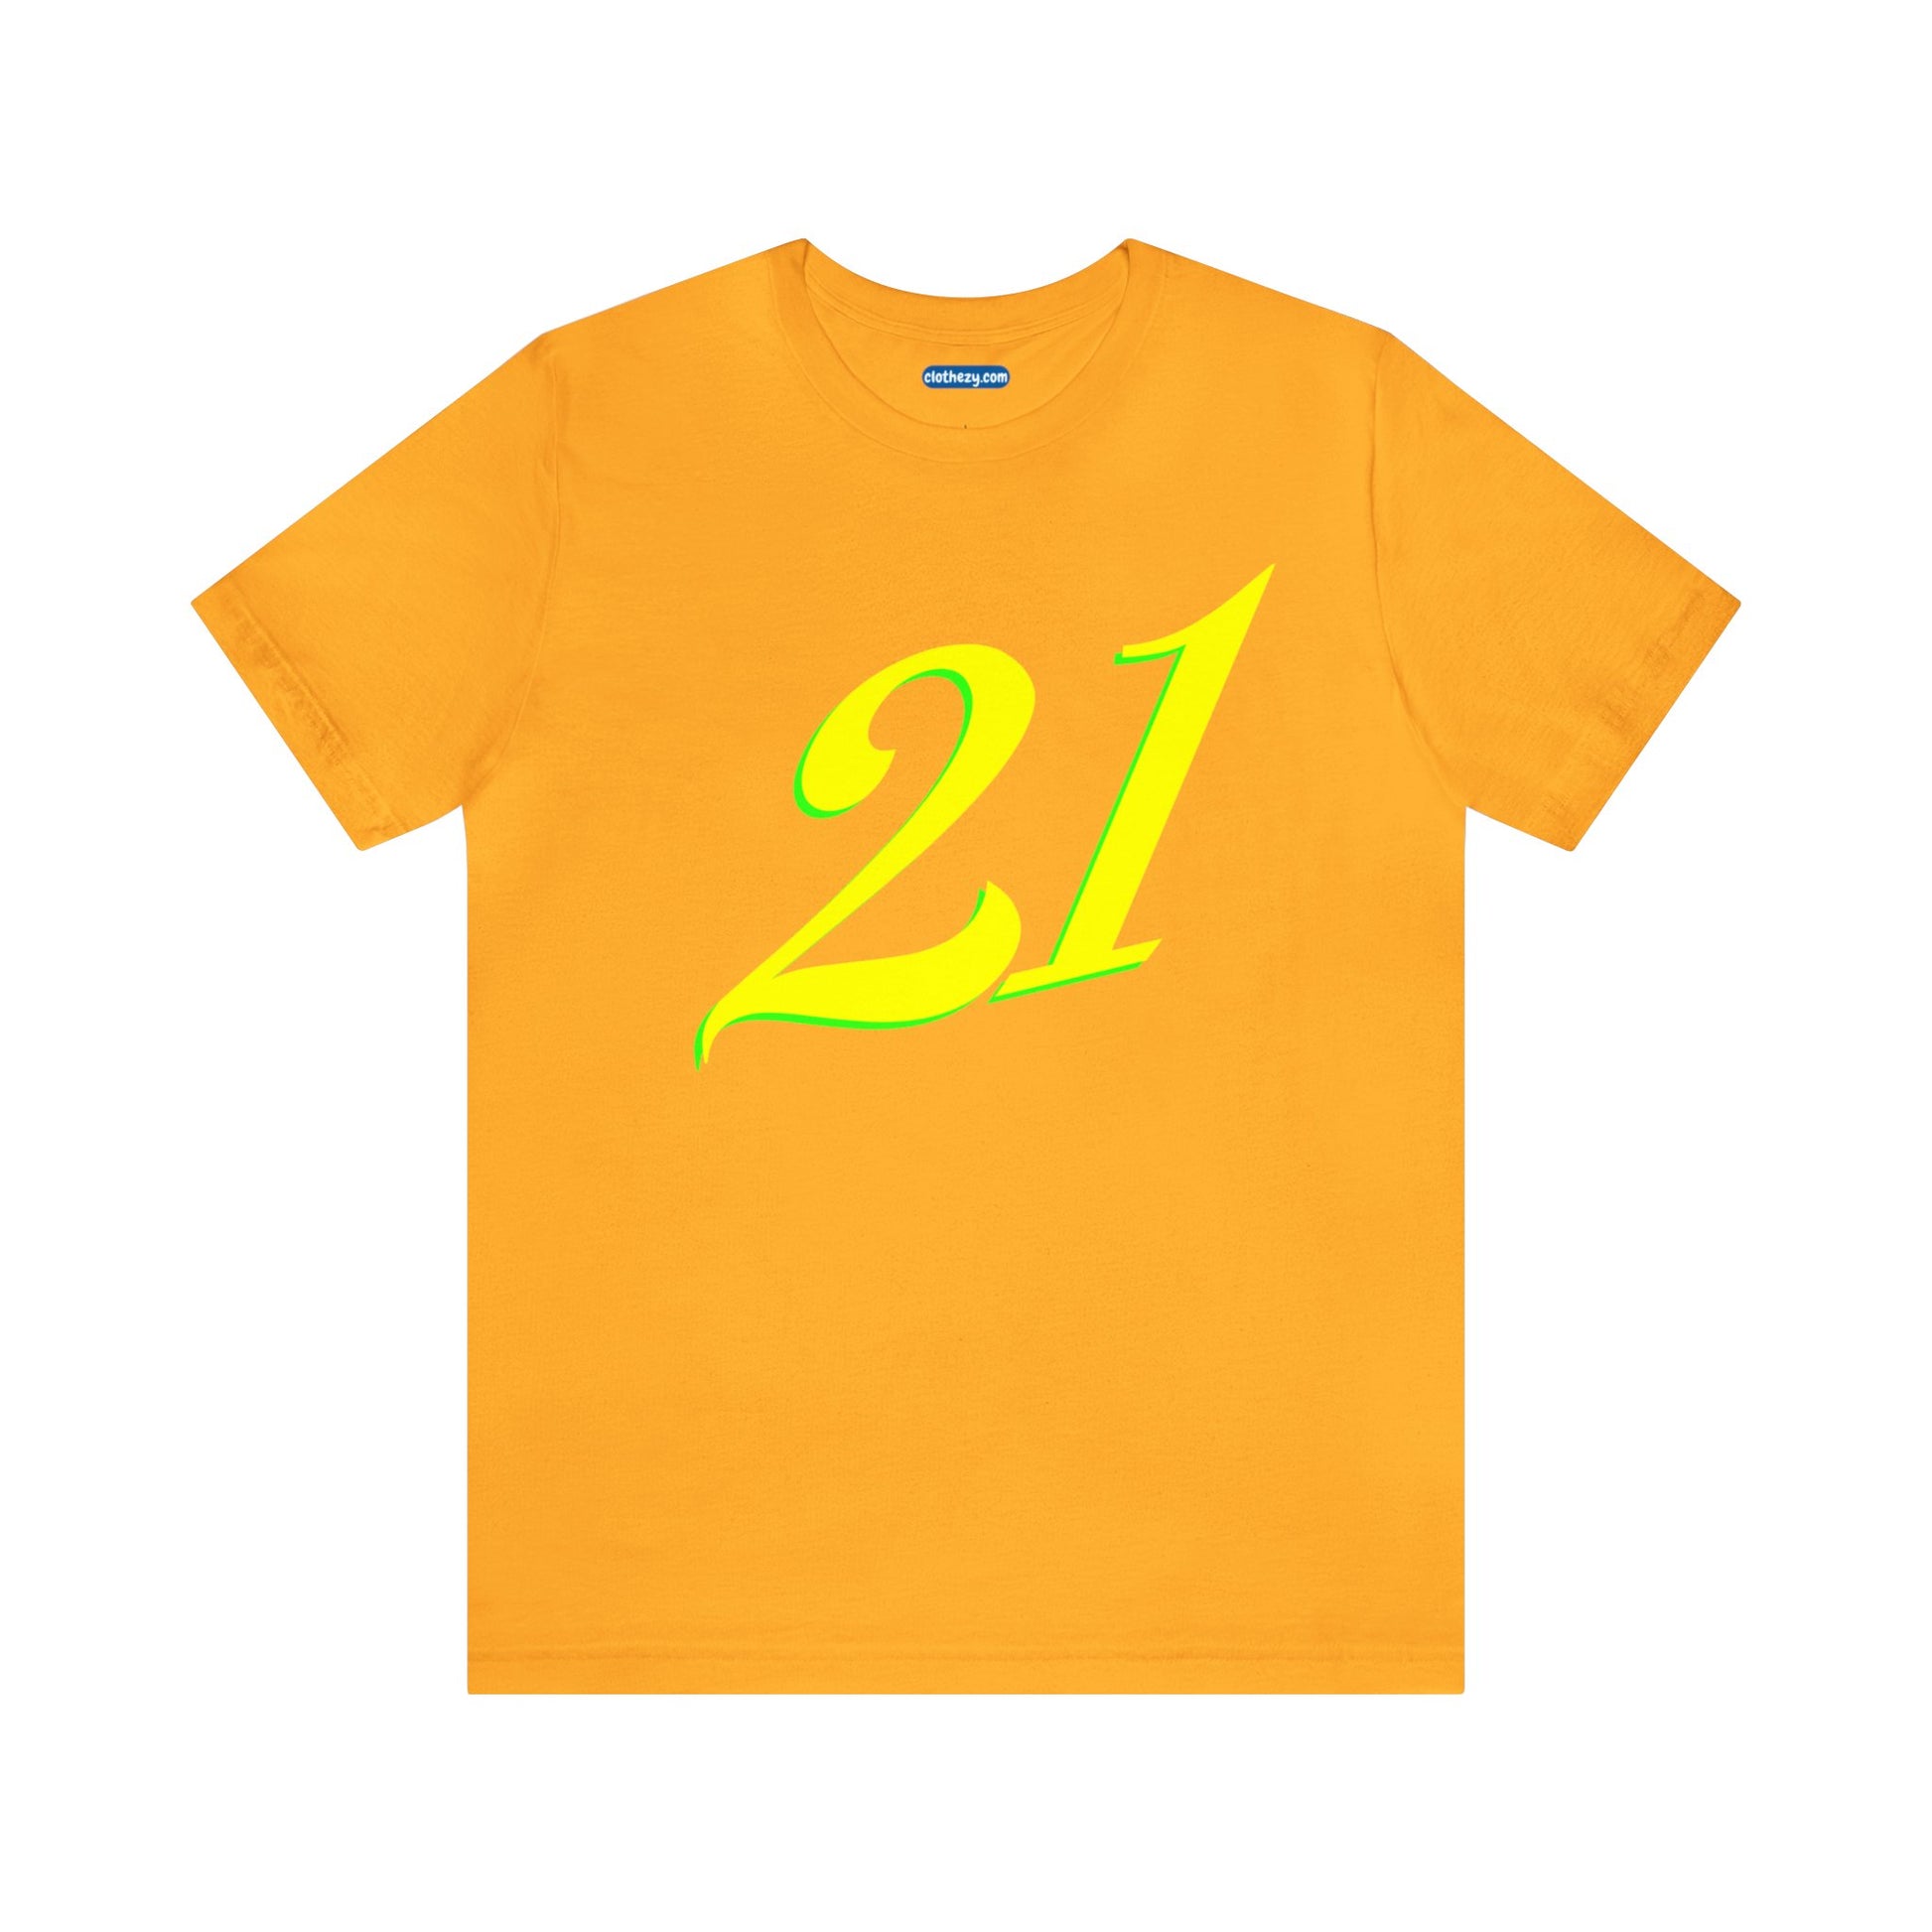 Number 21 Design - Soft Cotton Tee for birthdays and celebrations, Gift for friends and family, Multiple Options by clothezy.com in Green Heather Size Small - Buy Now